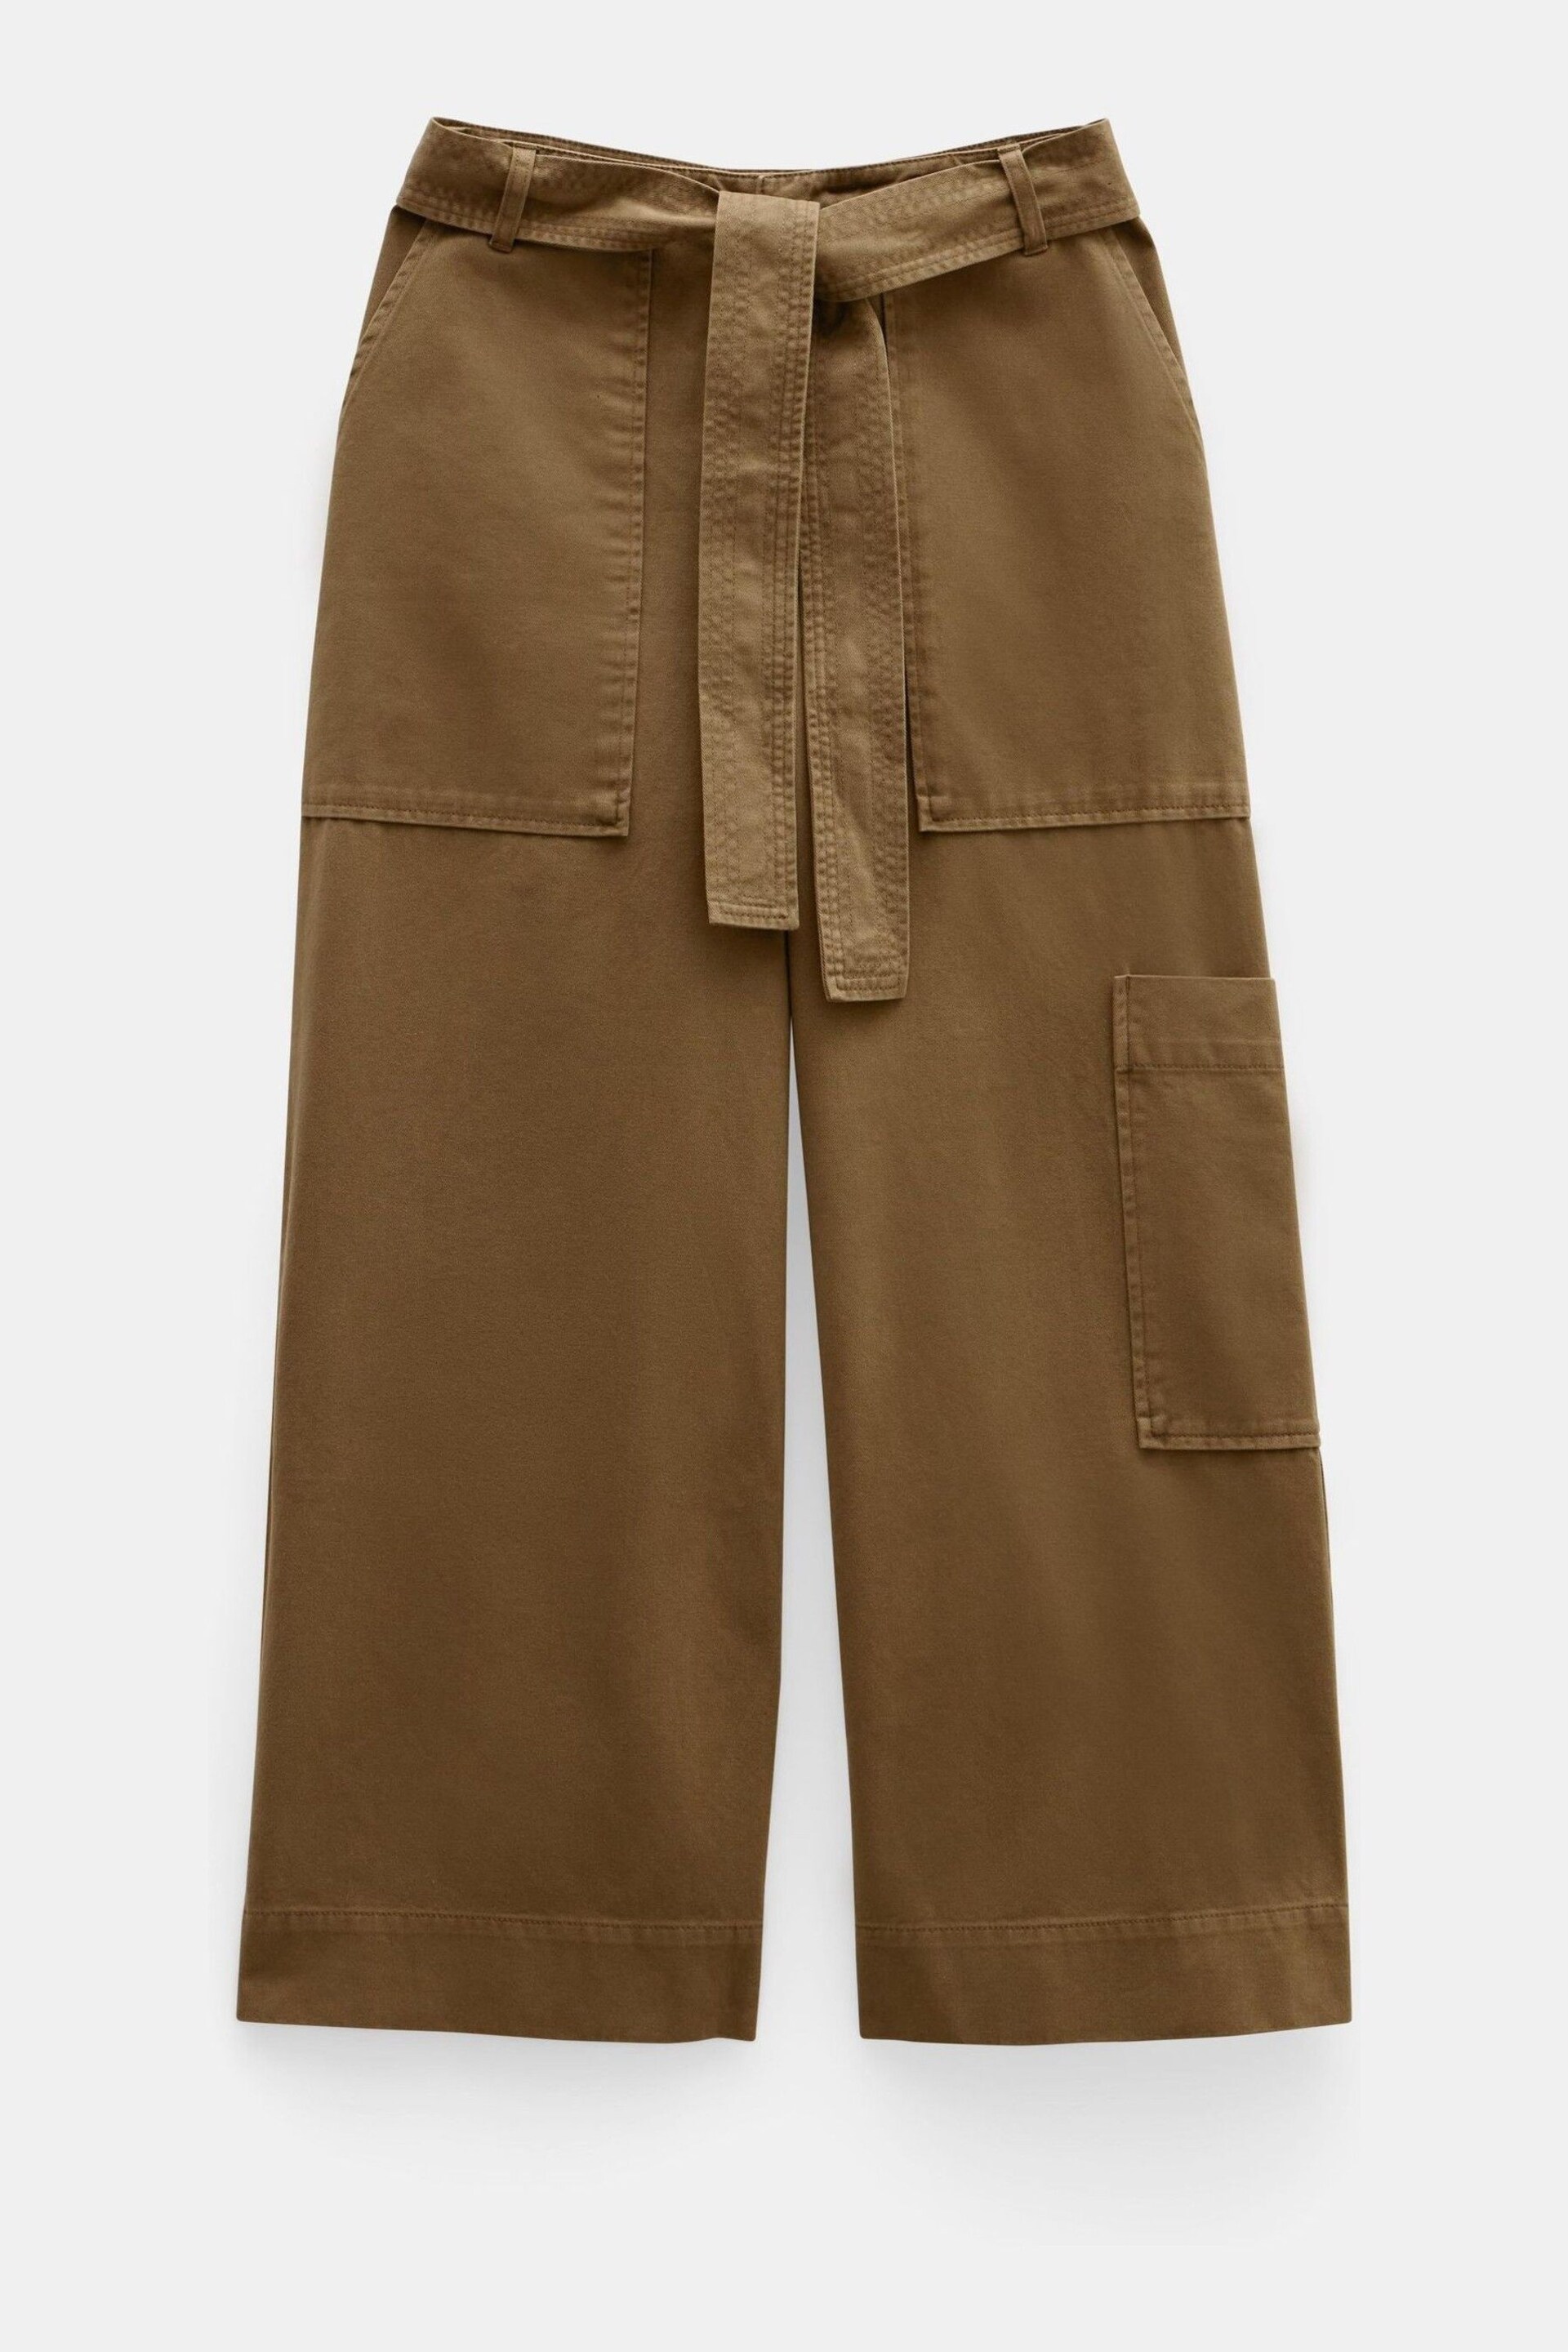 Hush Green Annie Ankle Grazer Trousers - Image 5 of 5